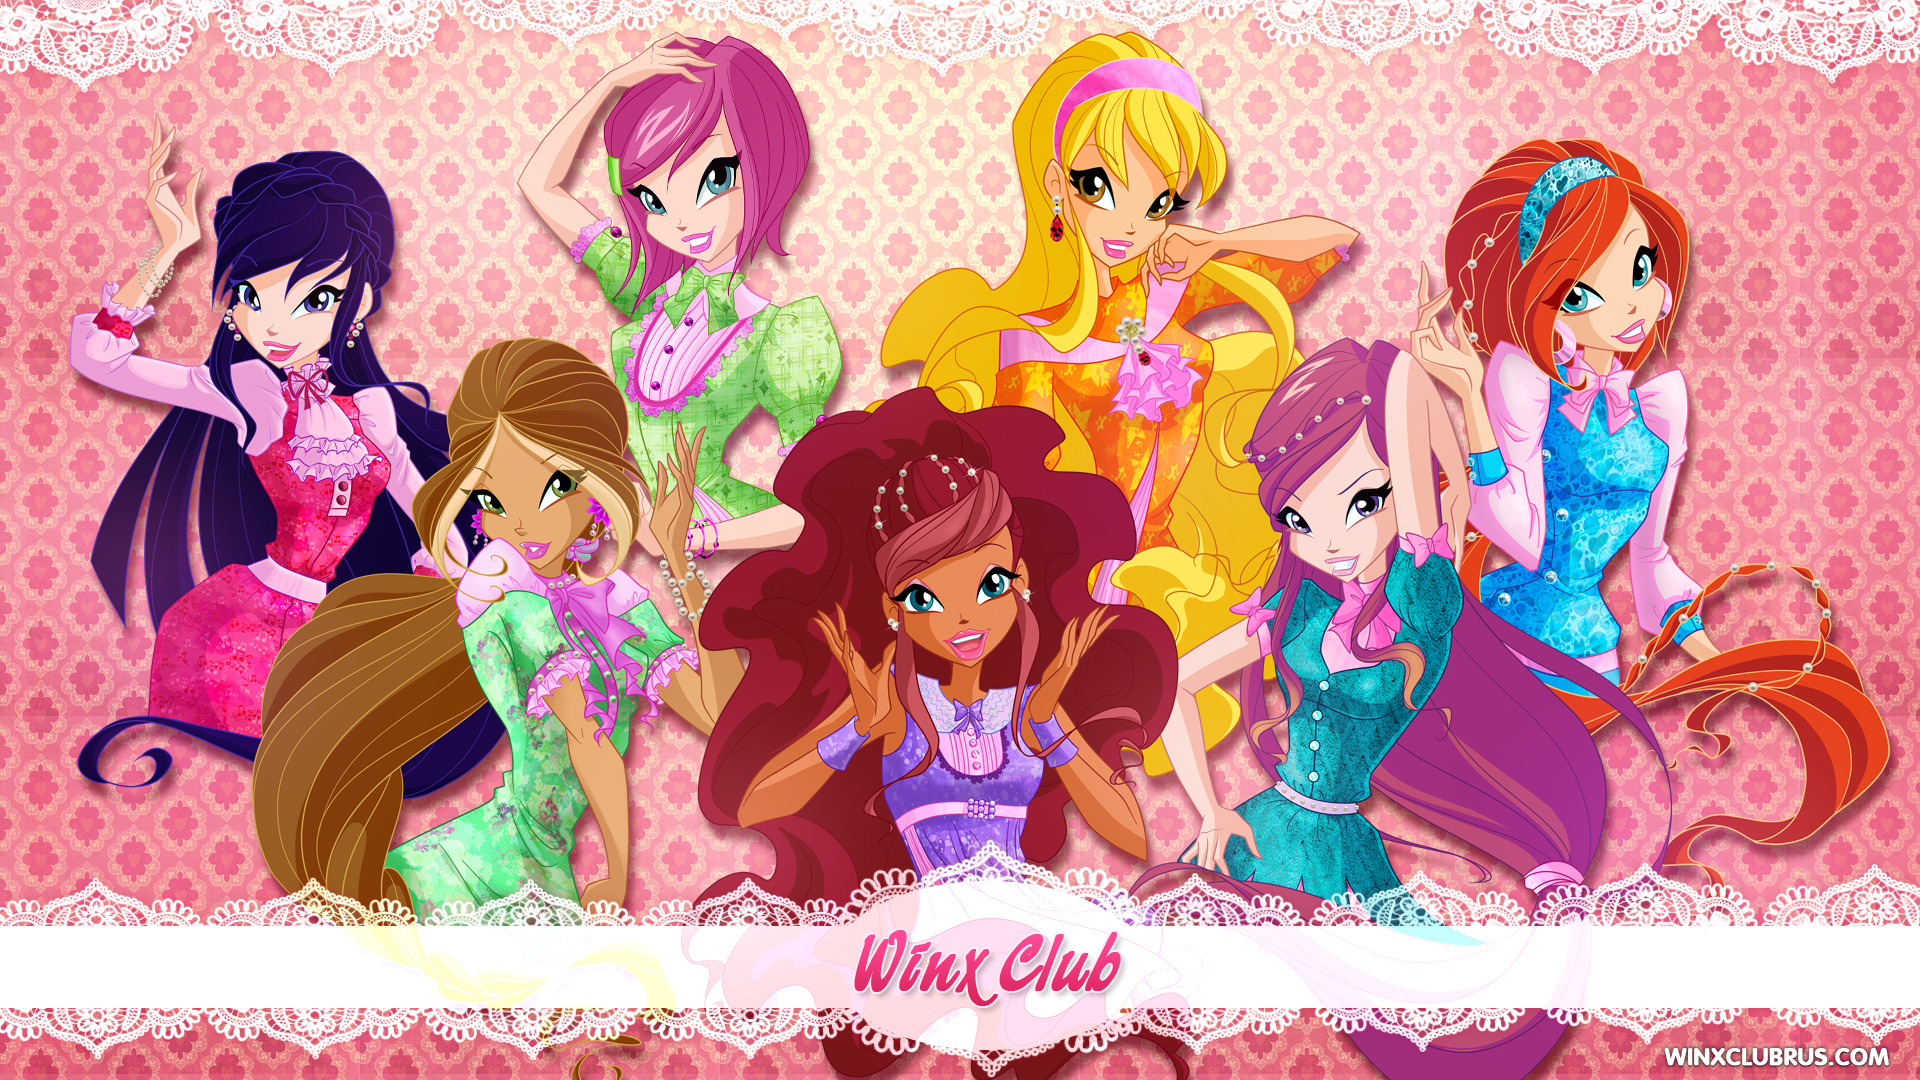 Winx Club 6 - A Magic Party [Official SoundTrack] - YouTube